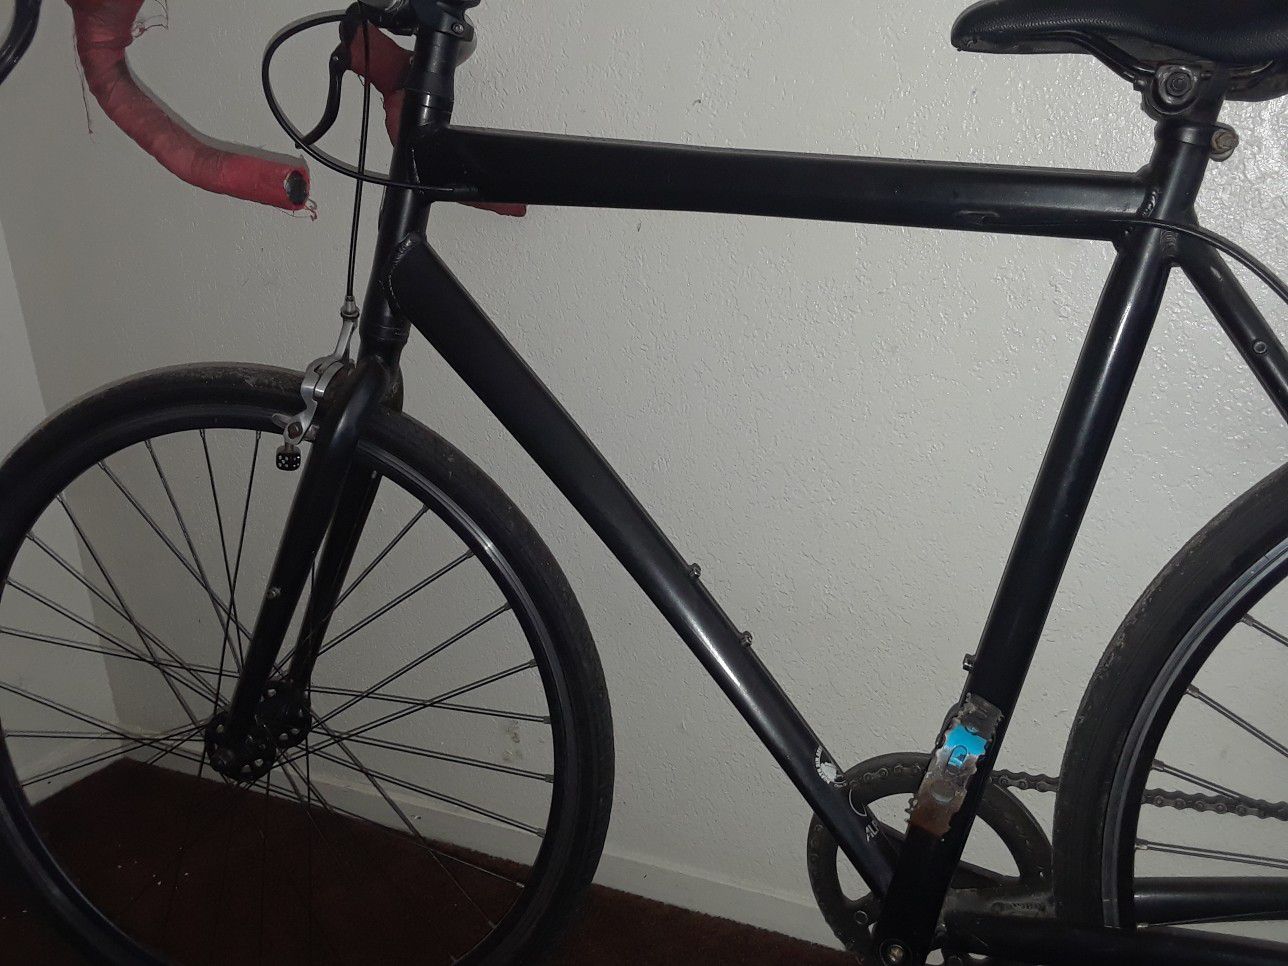 Looking to trade for another road bike similiar to mines